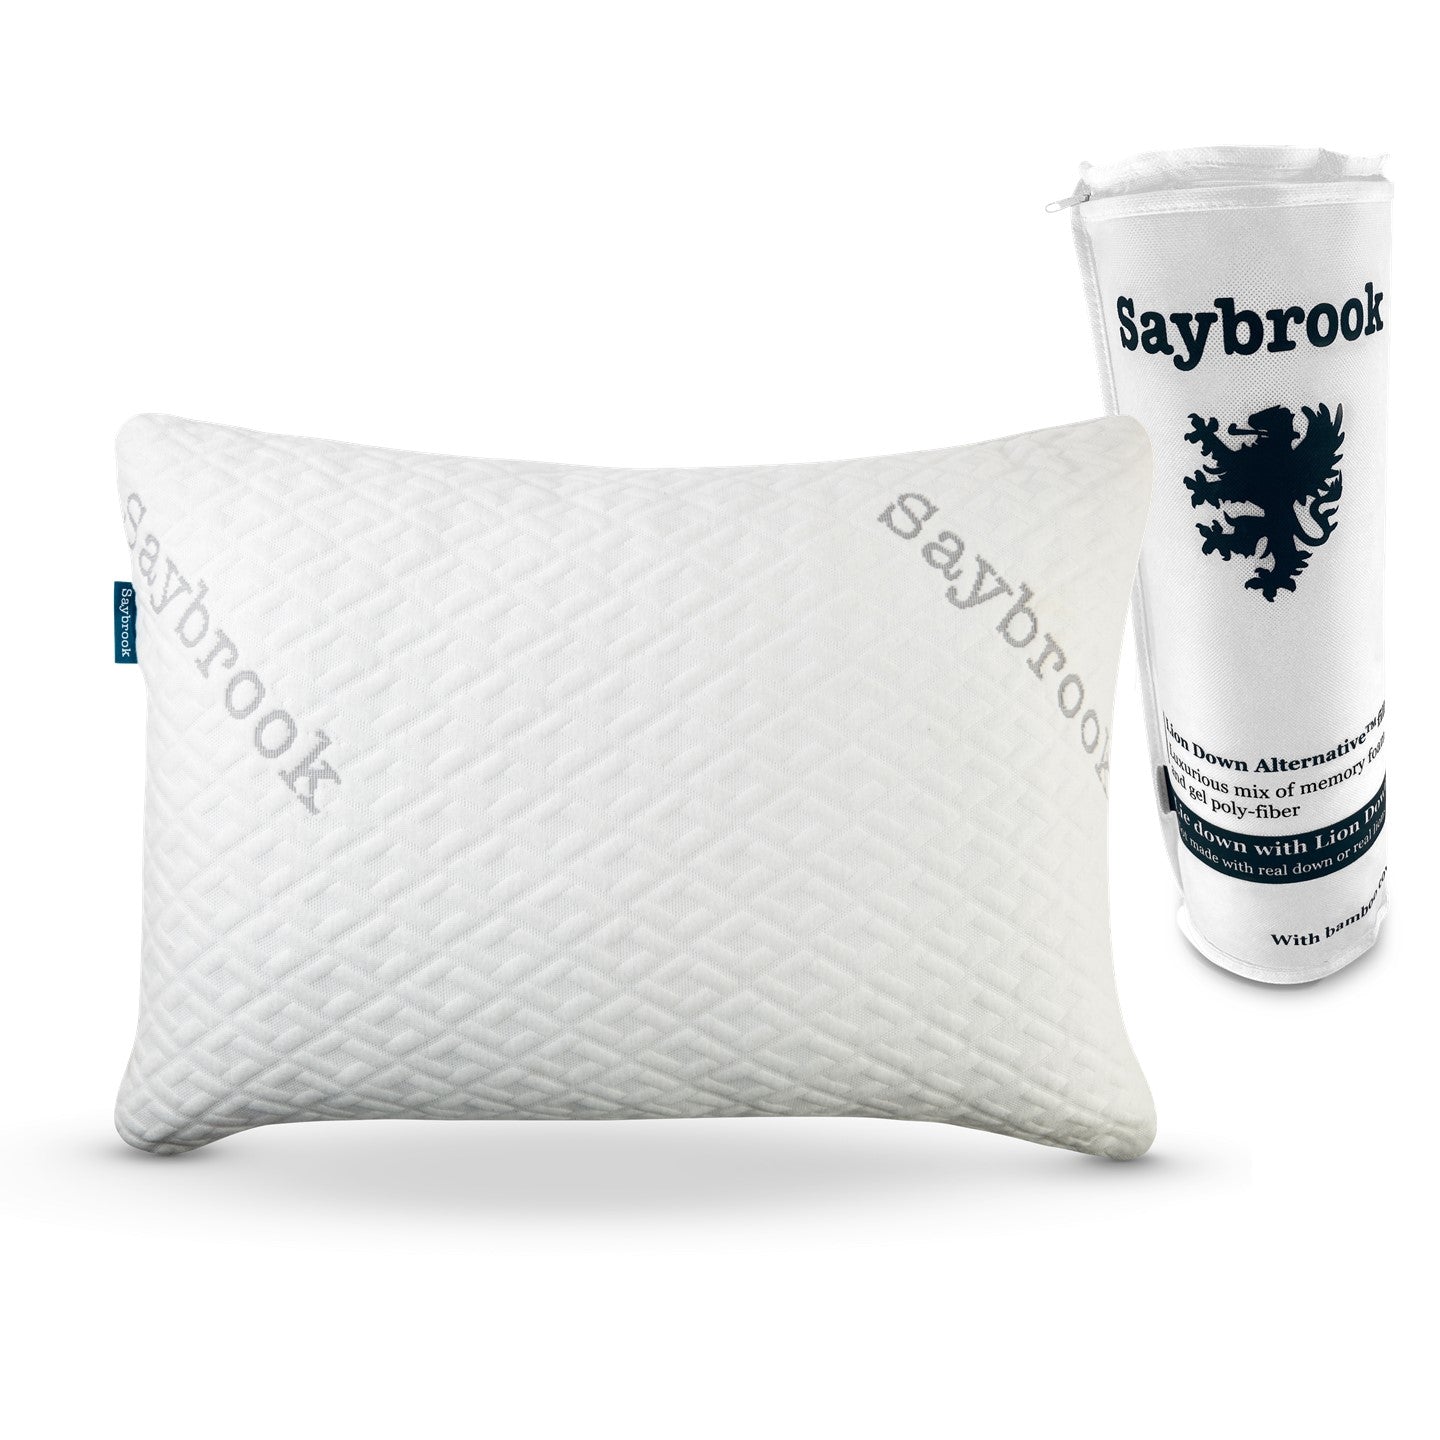 Layla Adjustable Fill Kapok Pillow, Luxury Cooling Pillow, Queen Size